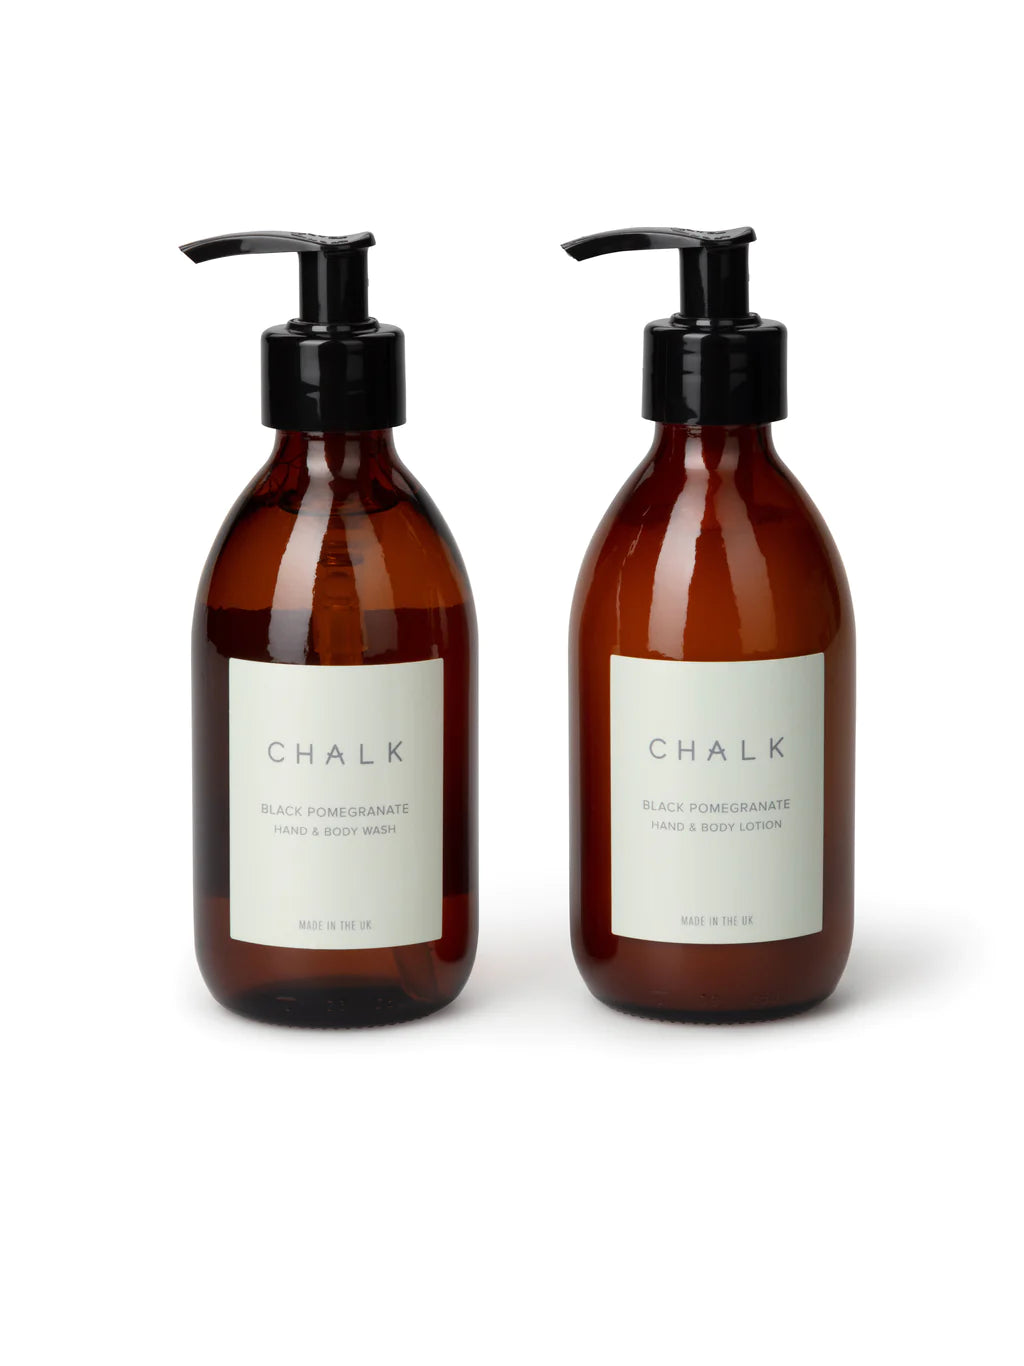 CHALK HAND AND BODY LOTION - BLACK POMEGRANATE